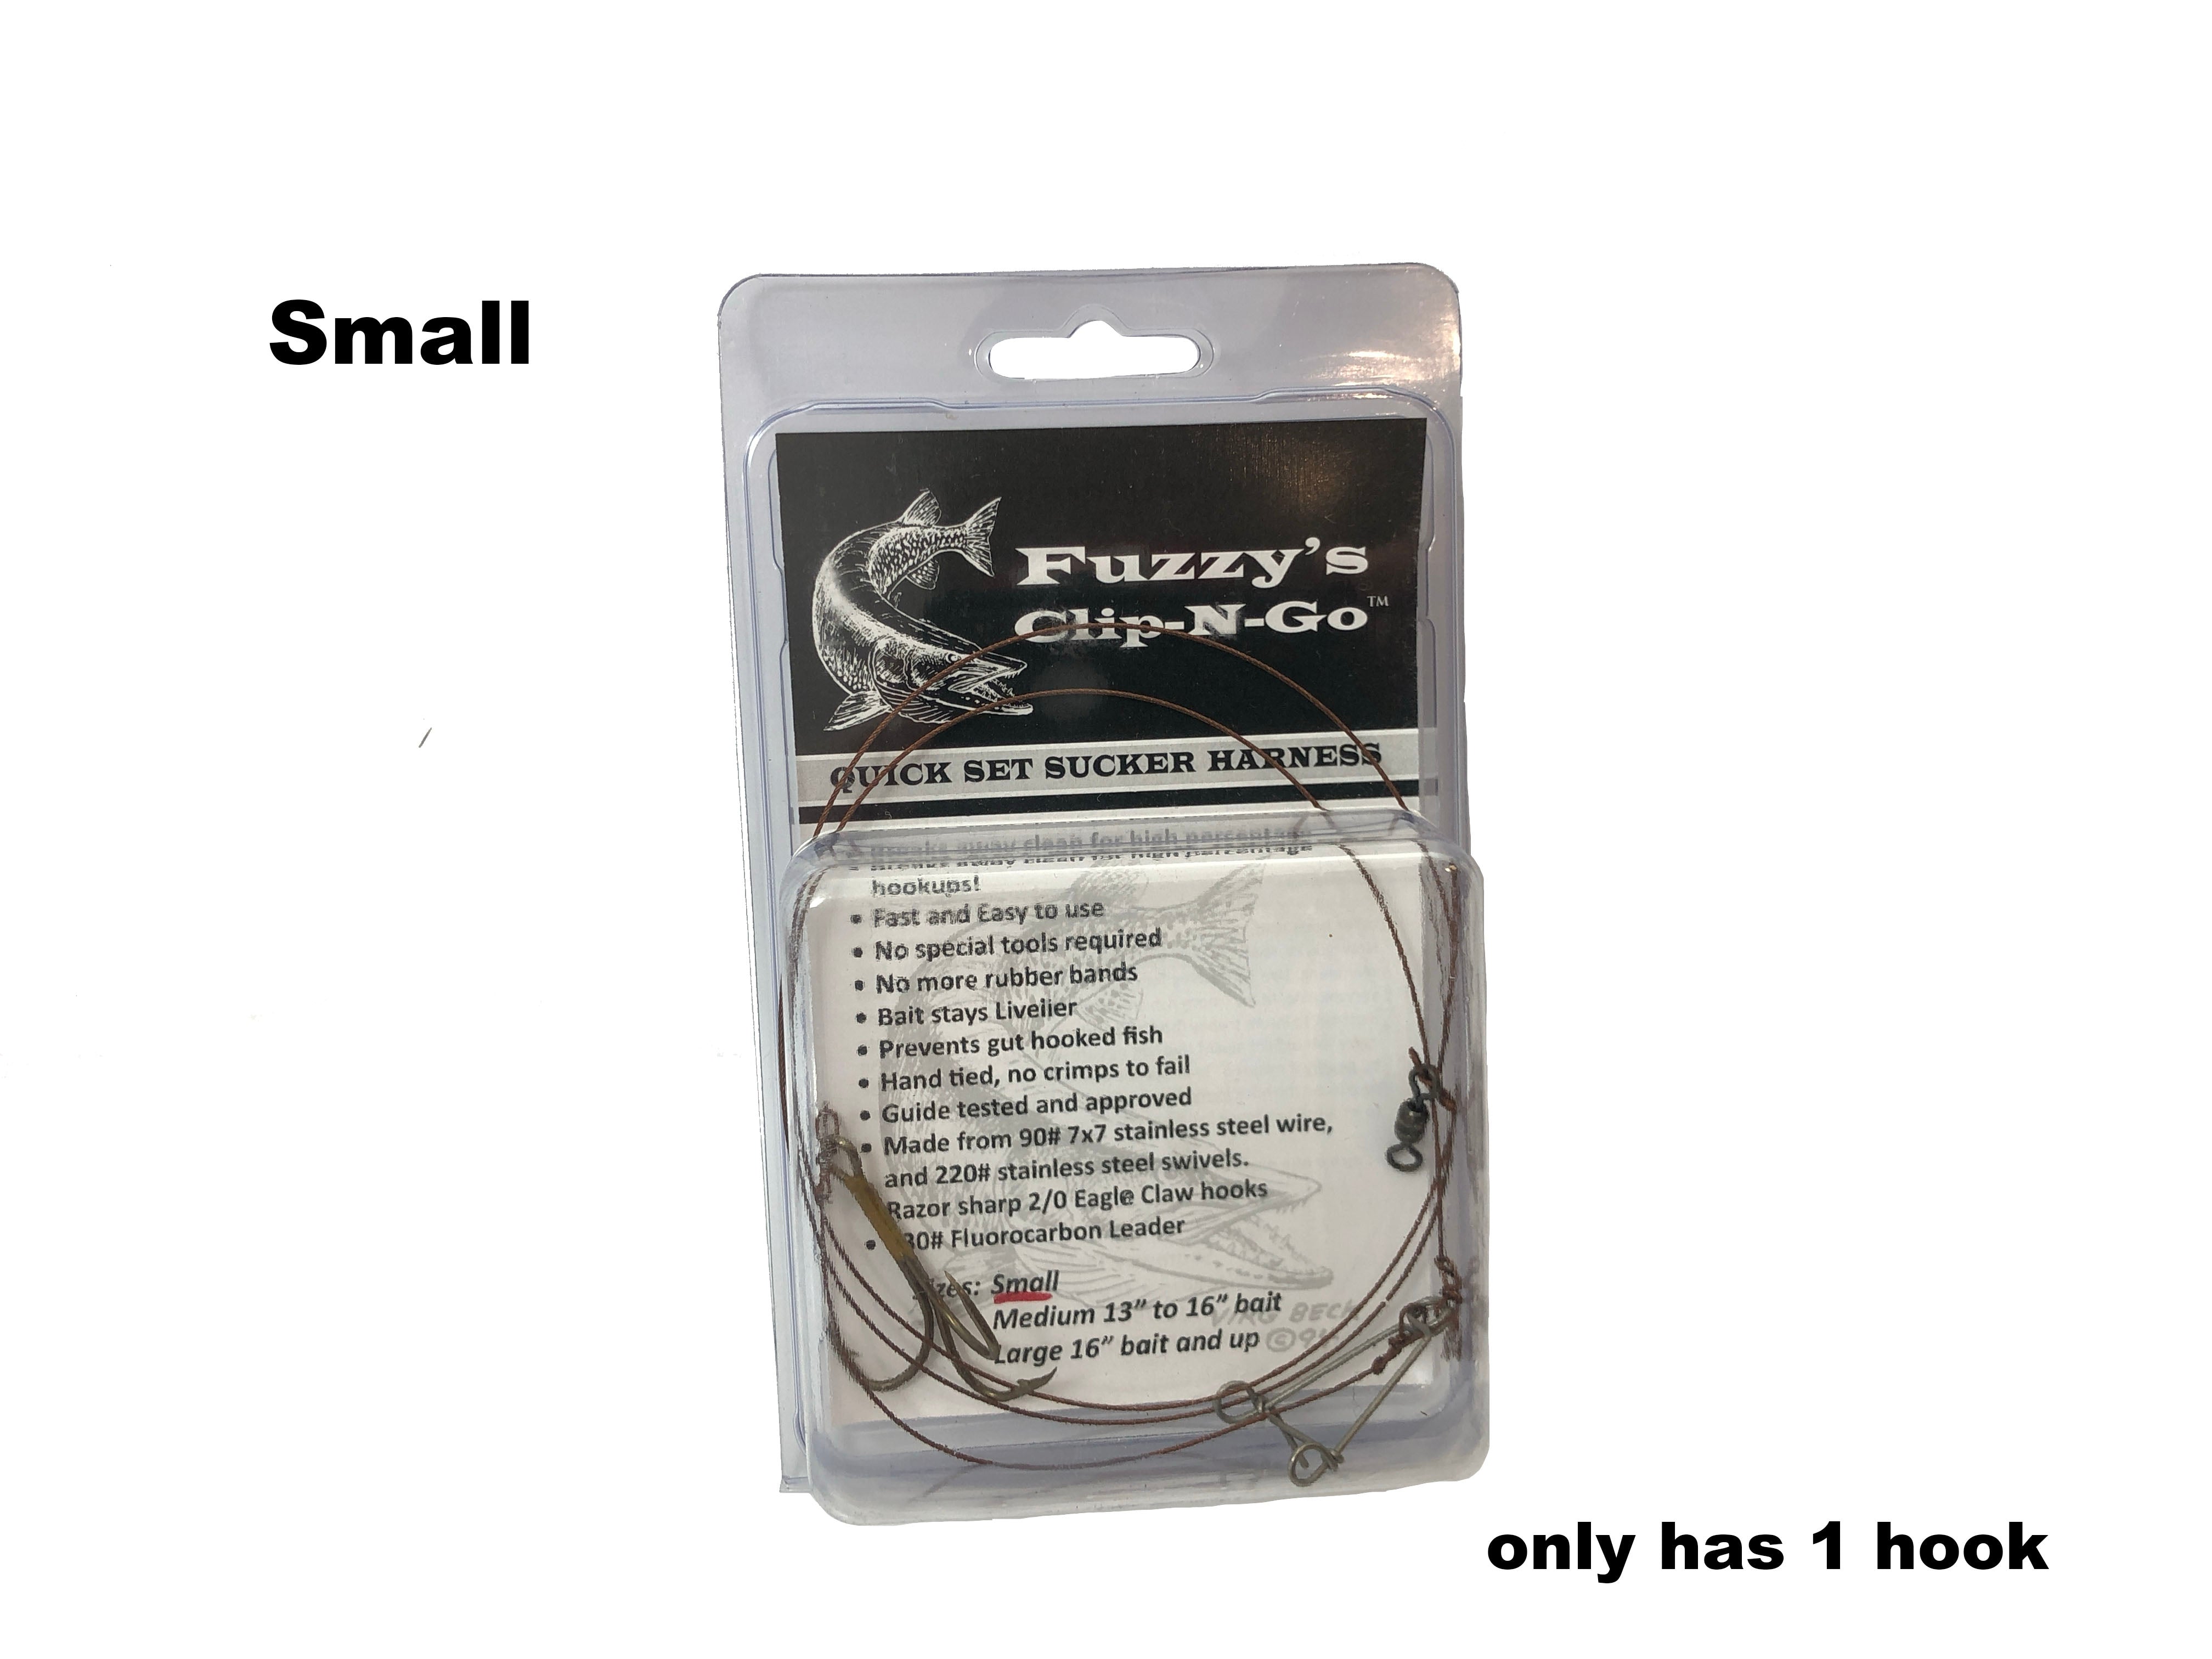 Shumway Tackle Fuzzy's Clip N Go Sucker Harness (3 sizes) – Team